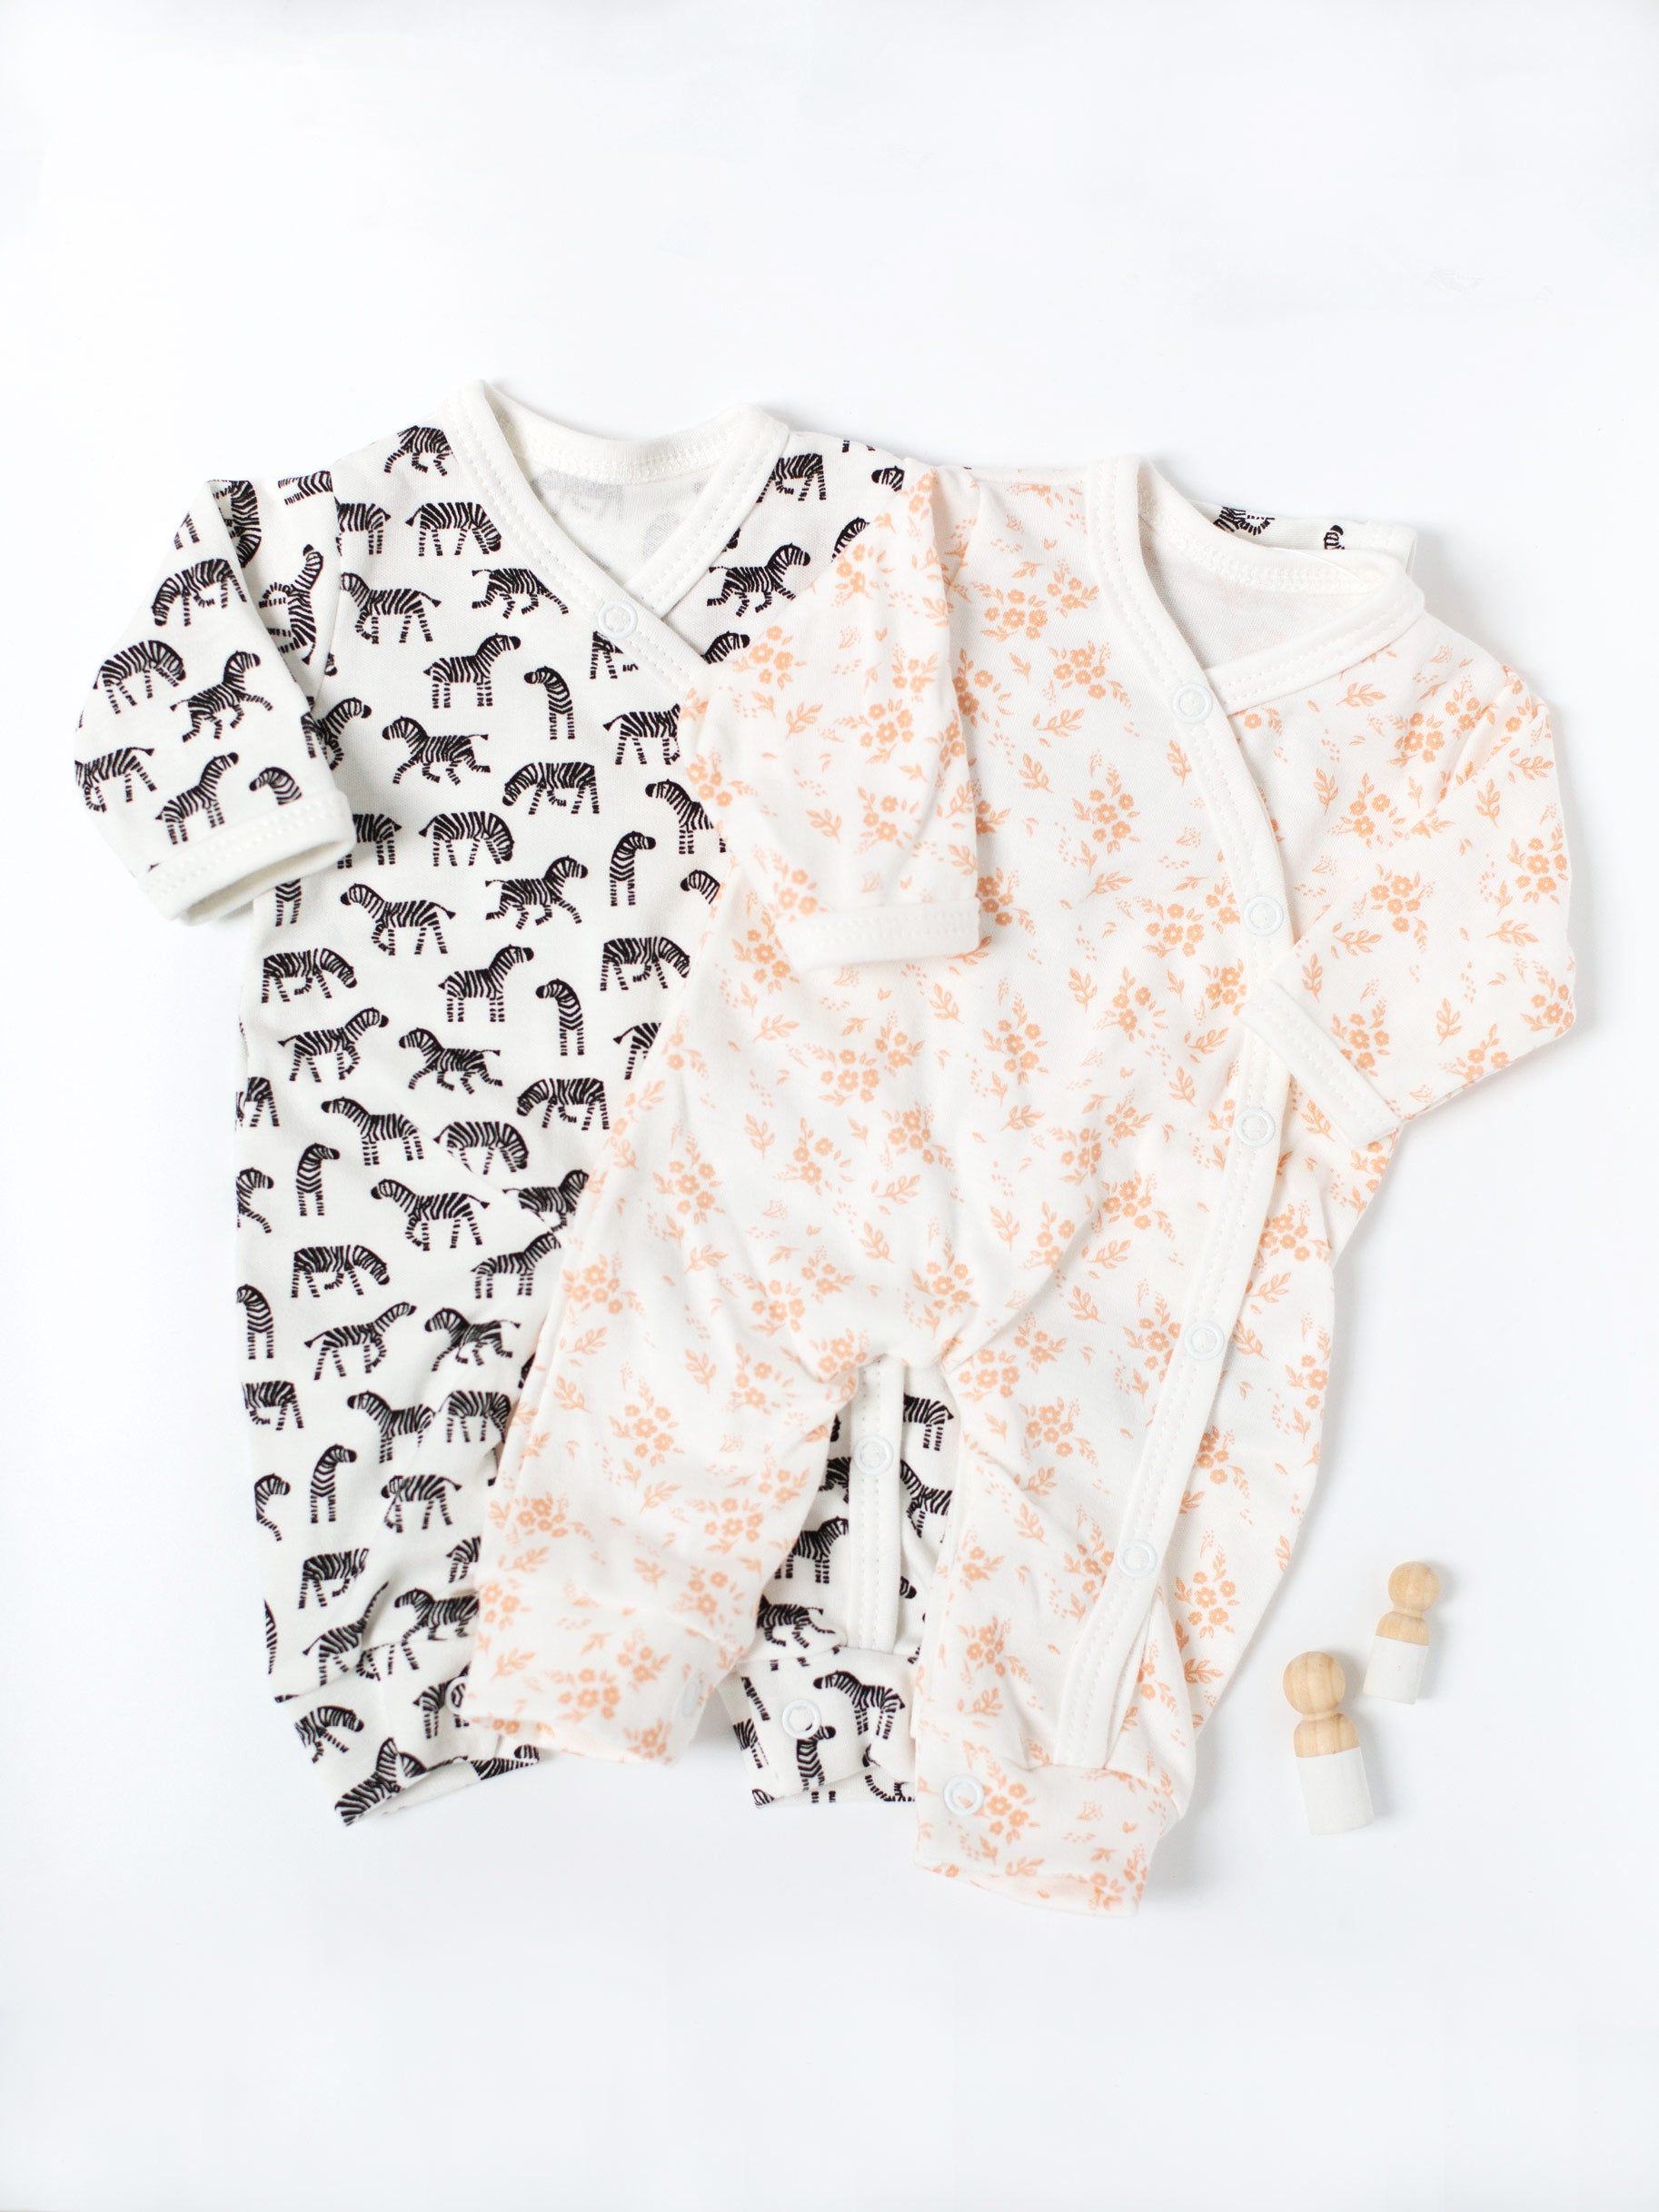 Twin Bundle - 2 Pack Sleepsuits, Little Zebras & Apricot Floral, 100% Organic Cotton Set/Multipack Tiny & Small 